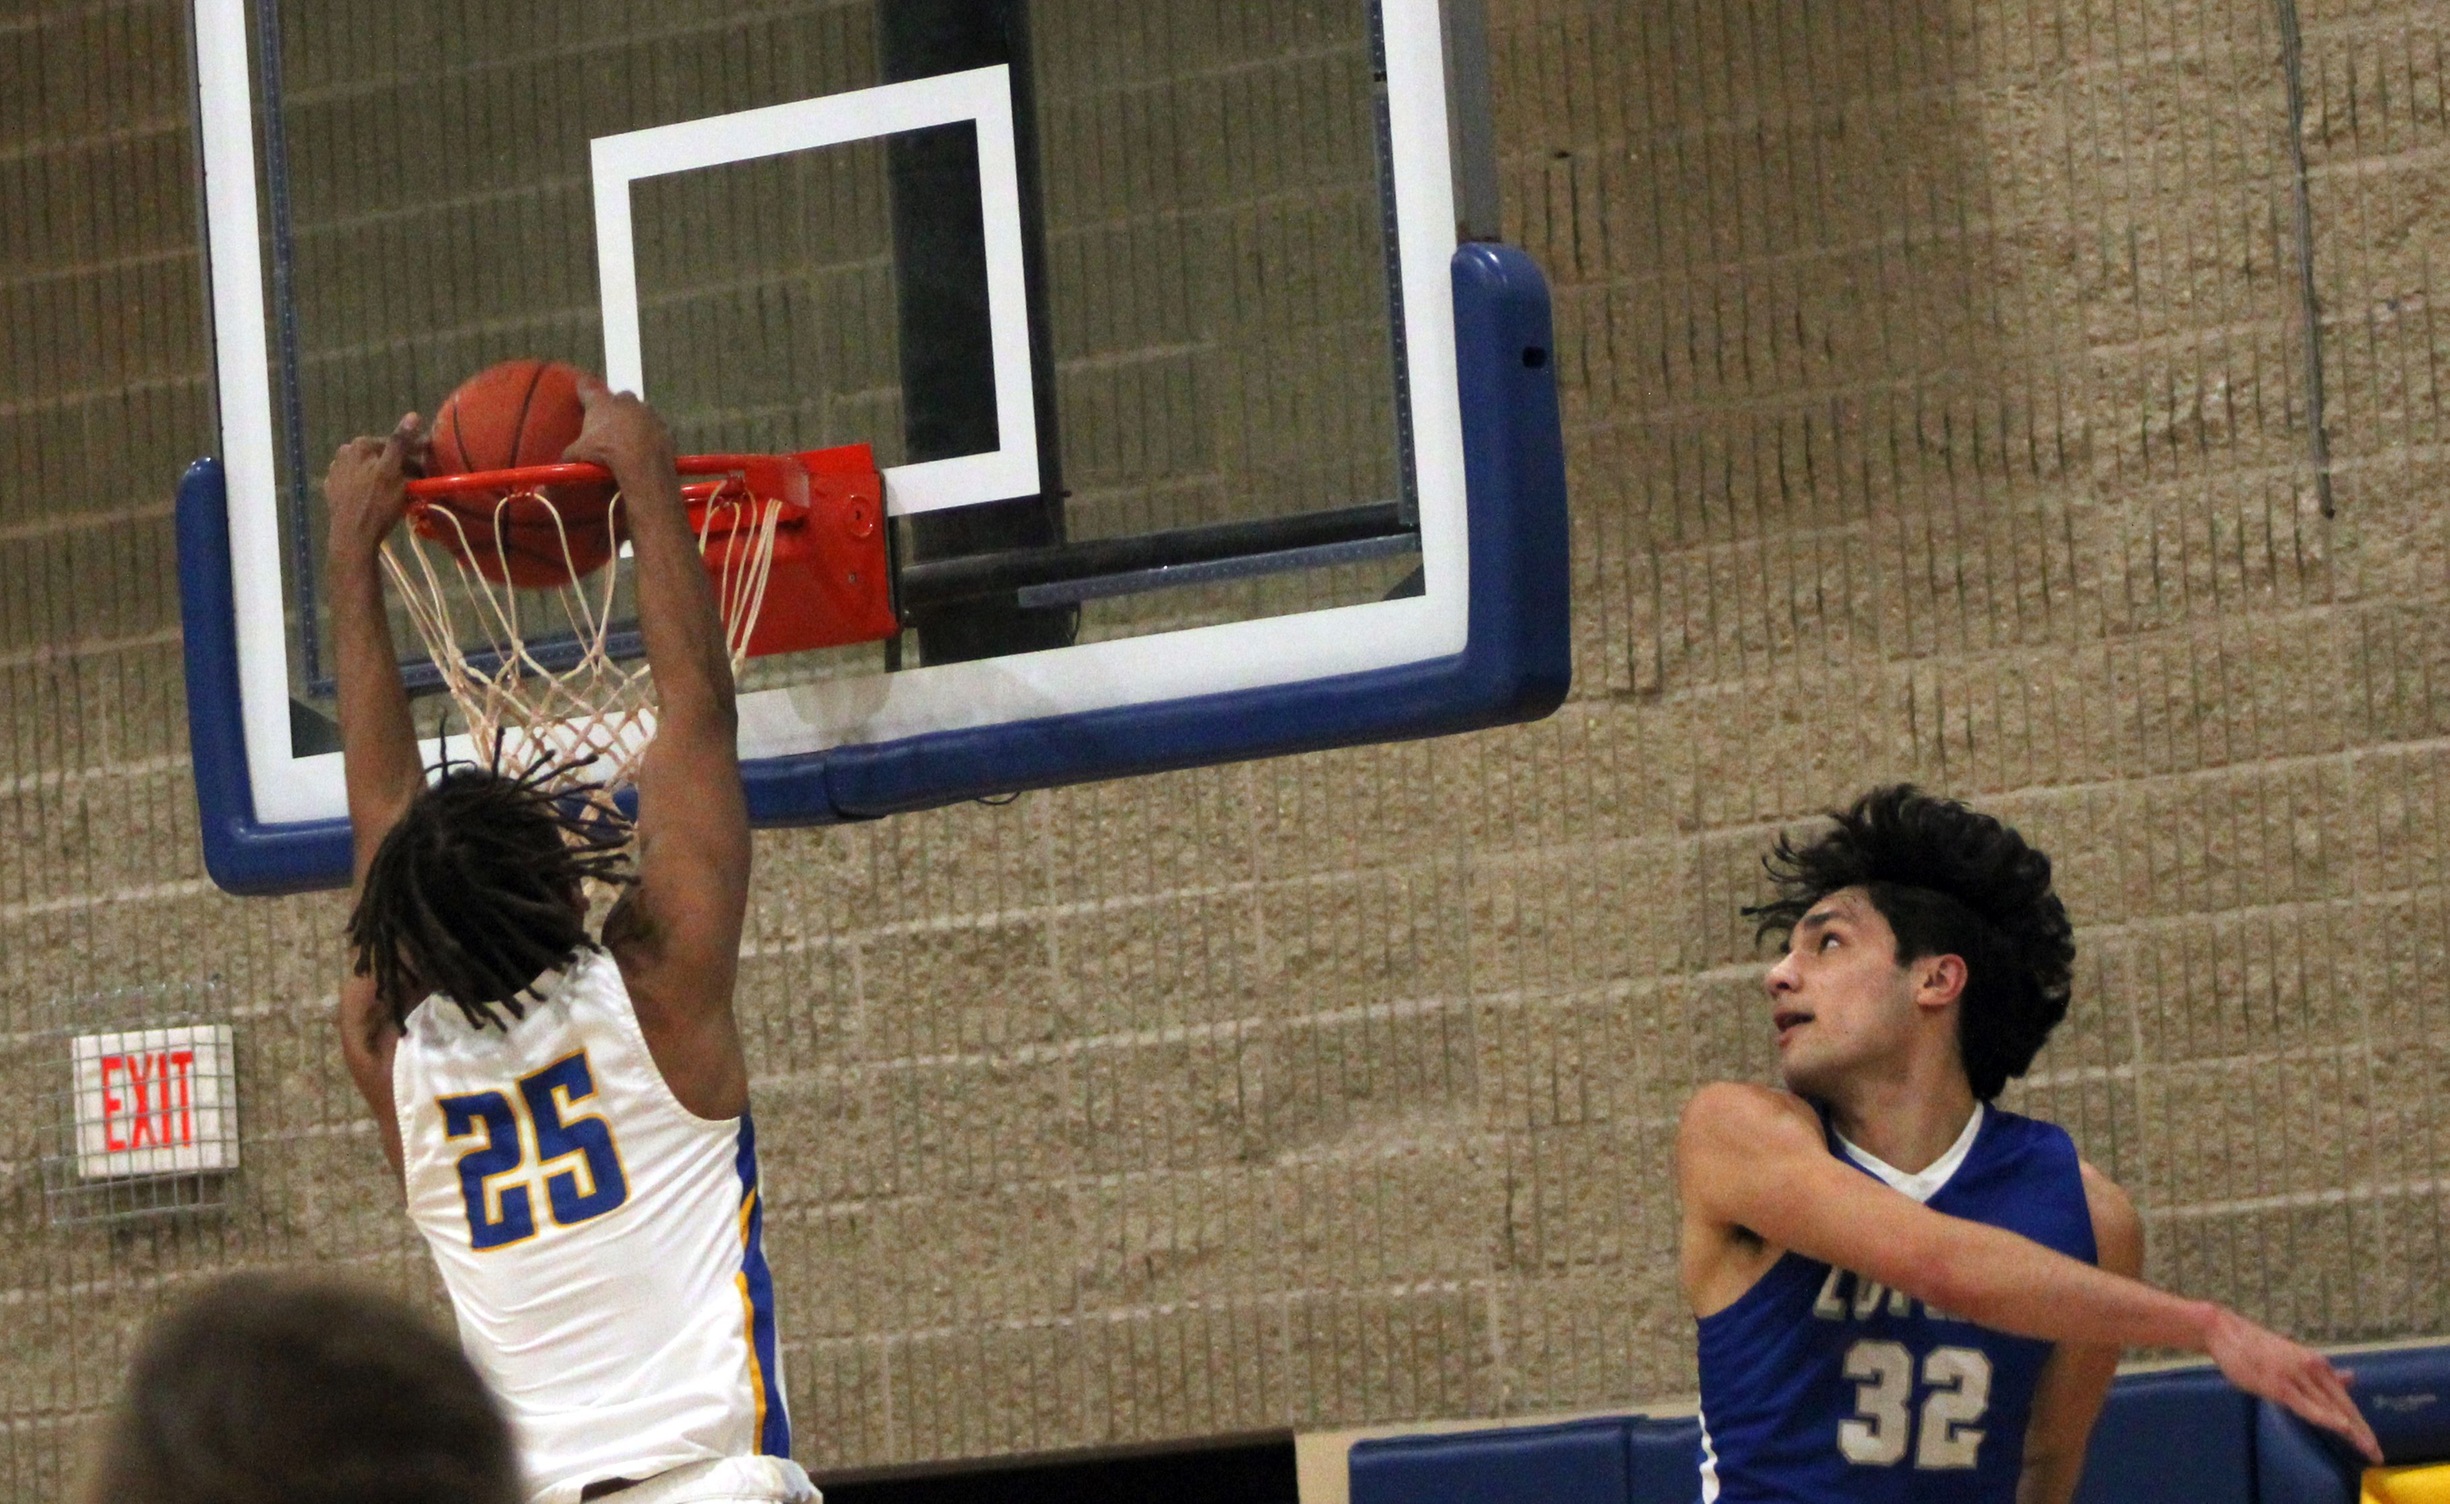 NIACC's Trey Woolsey dunks for 2 points in Monday's 90-60 win over the Luther College Junior Varsity in the NIACC gym.